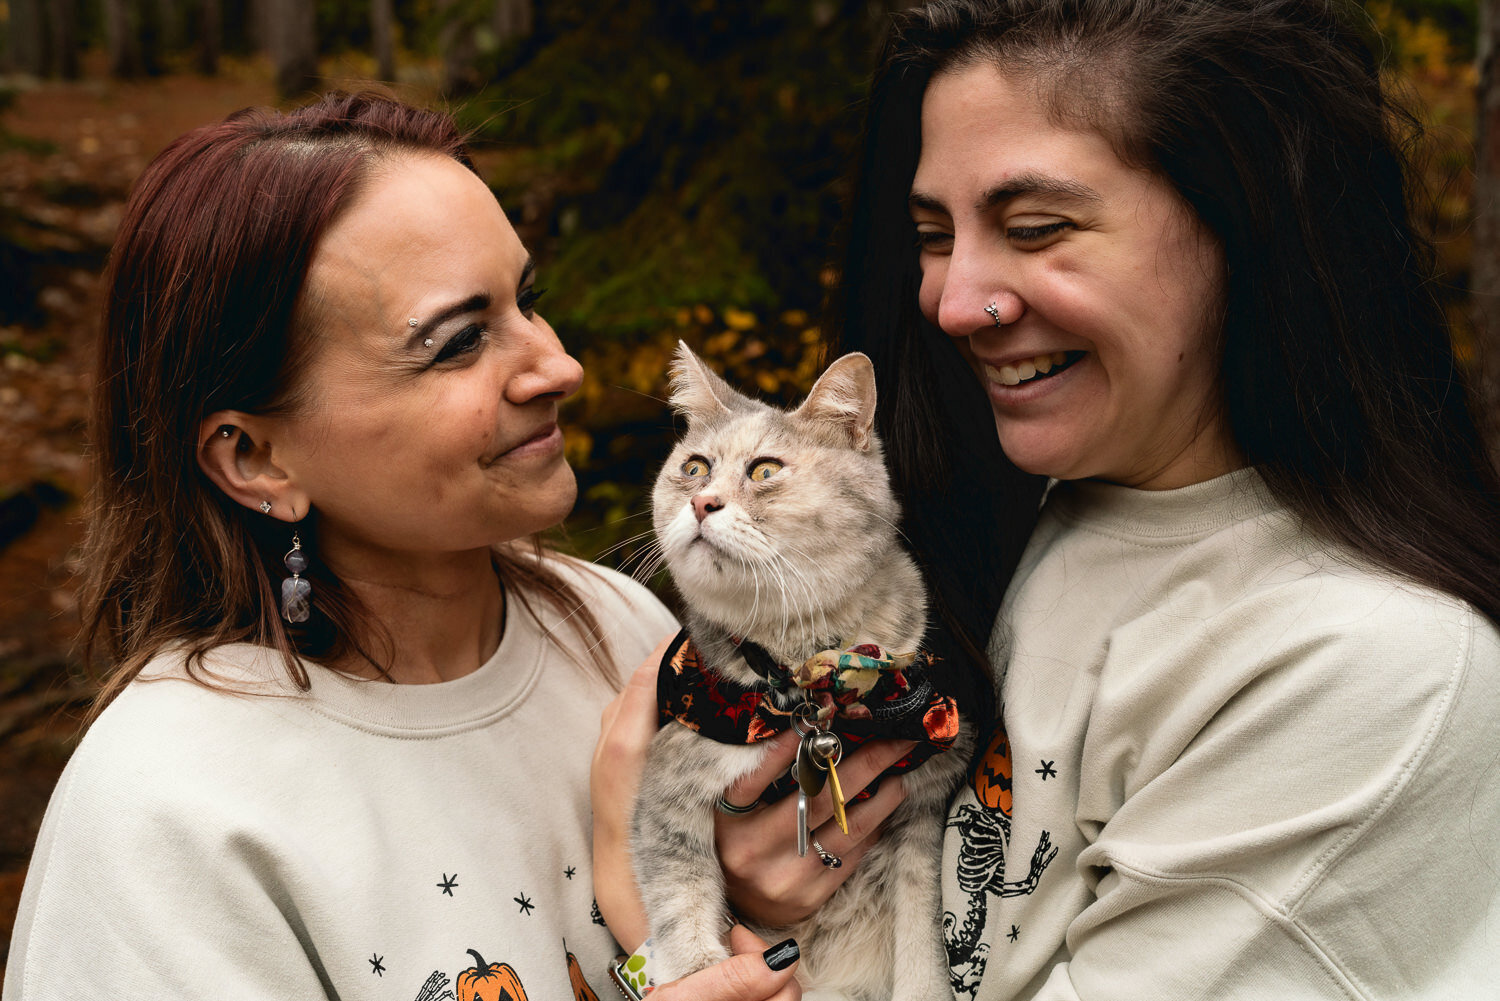 Lesbian couple smile while holding their cat.